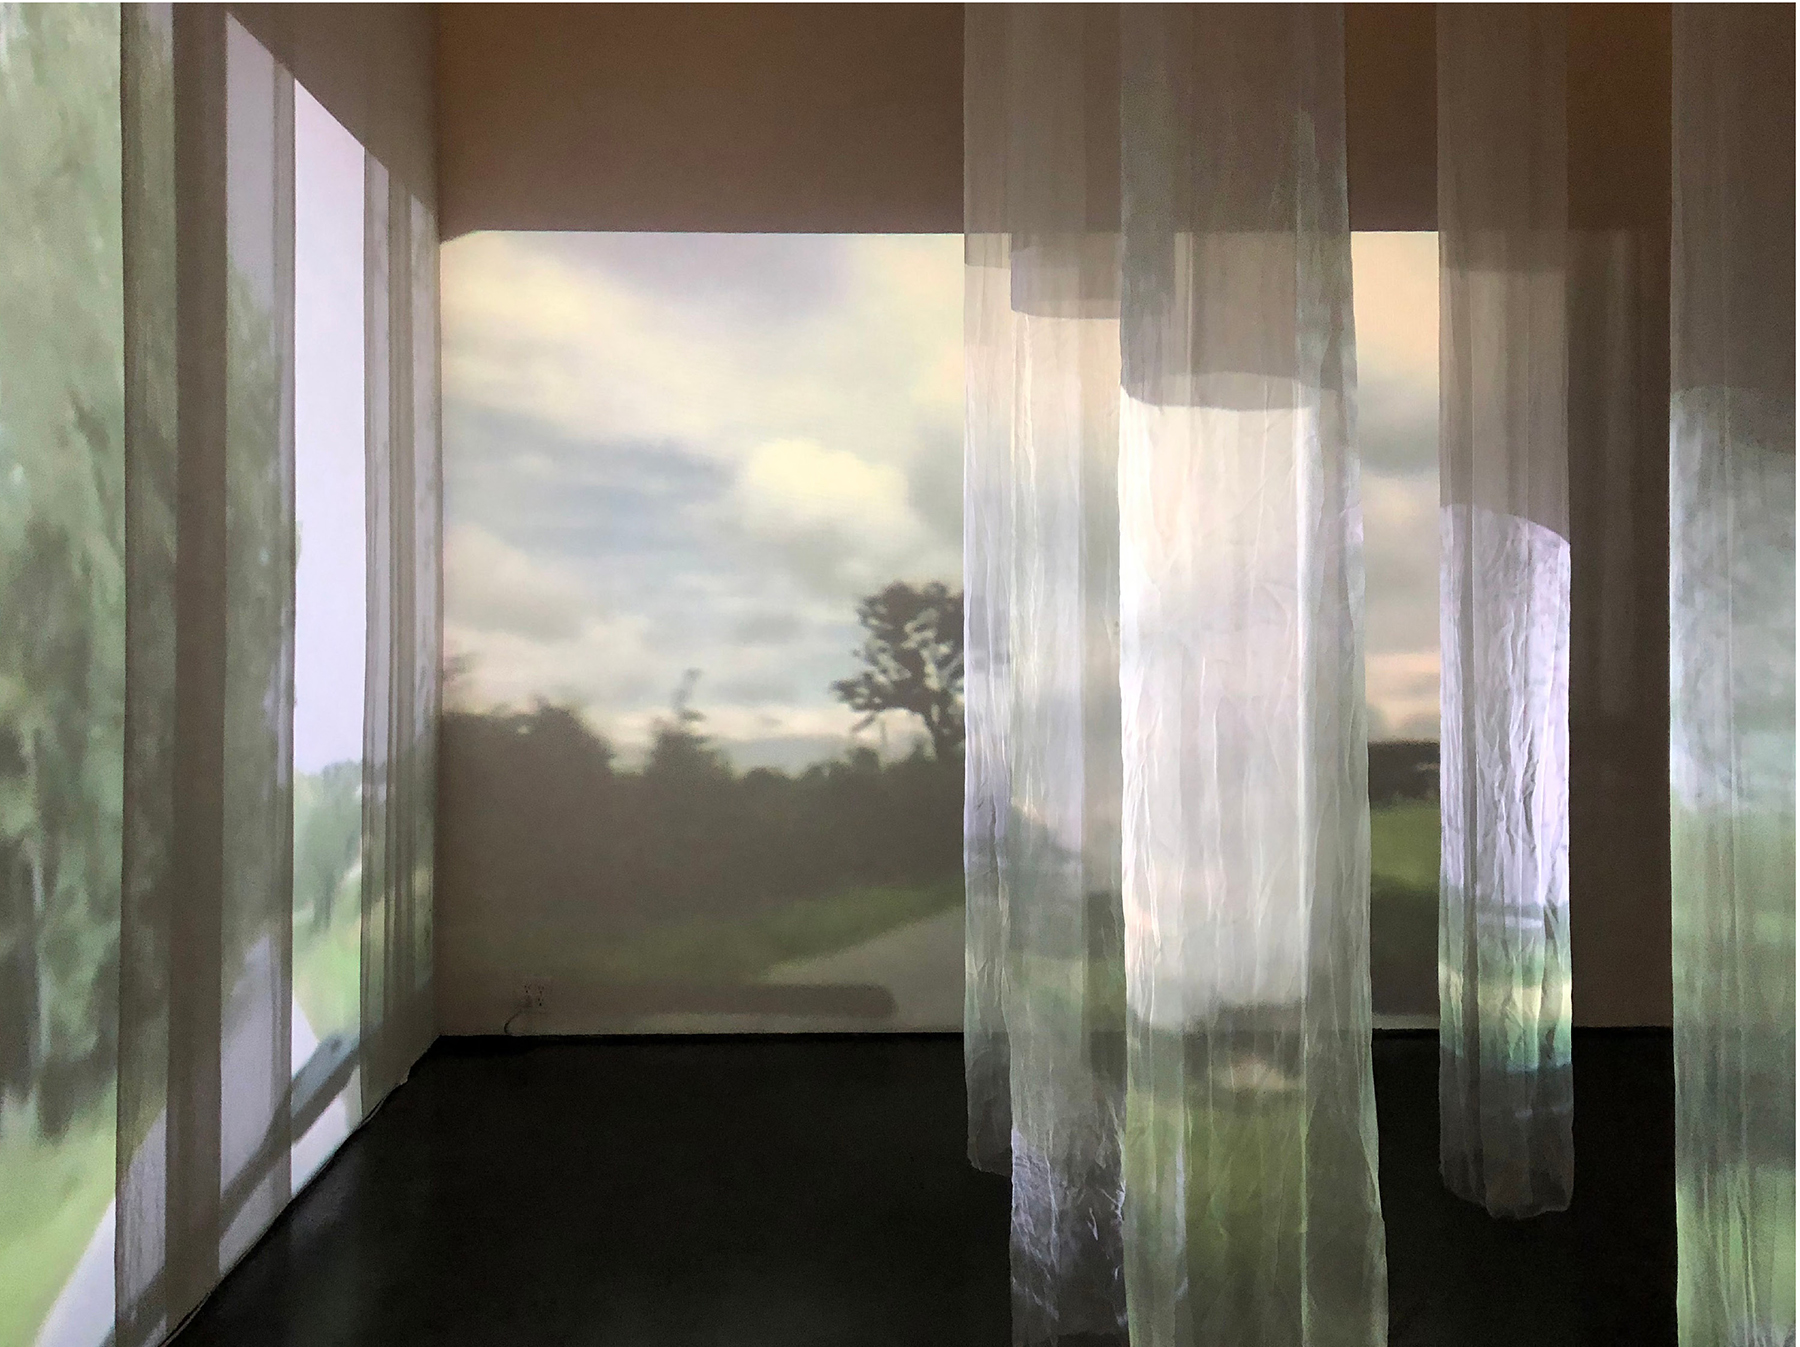 installation view with video